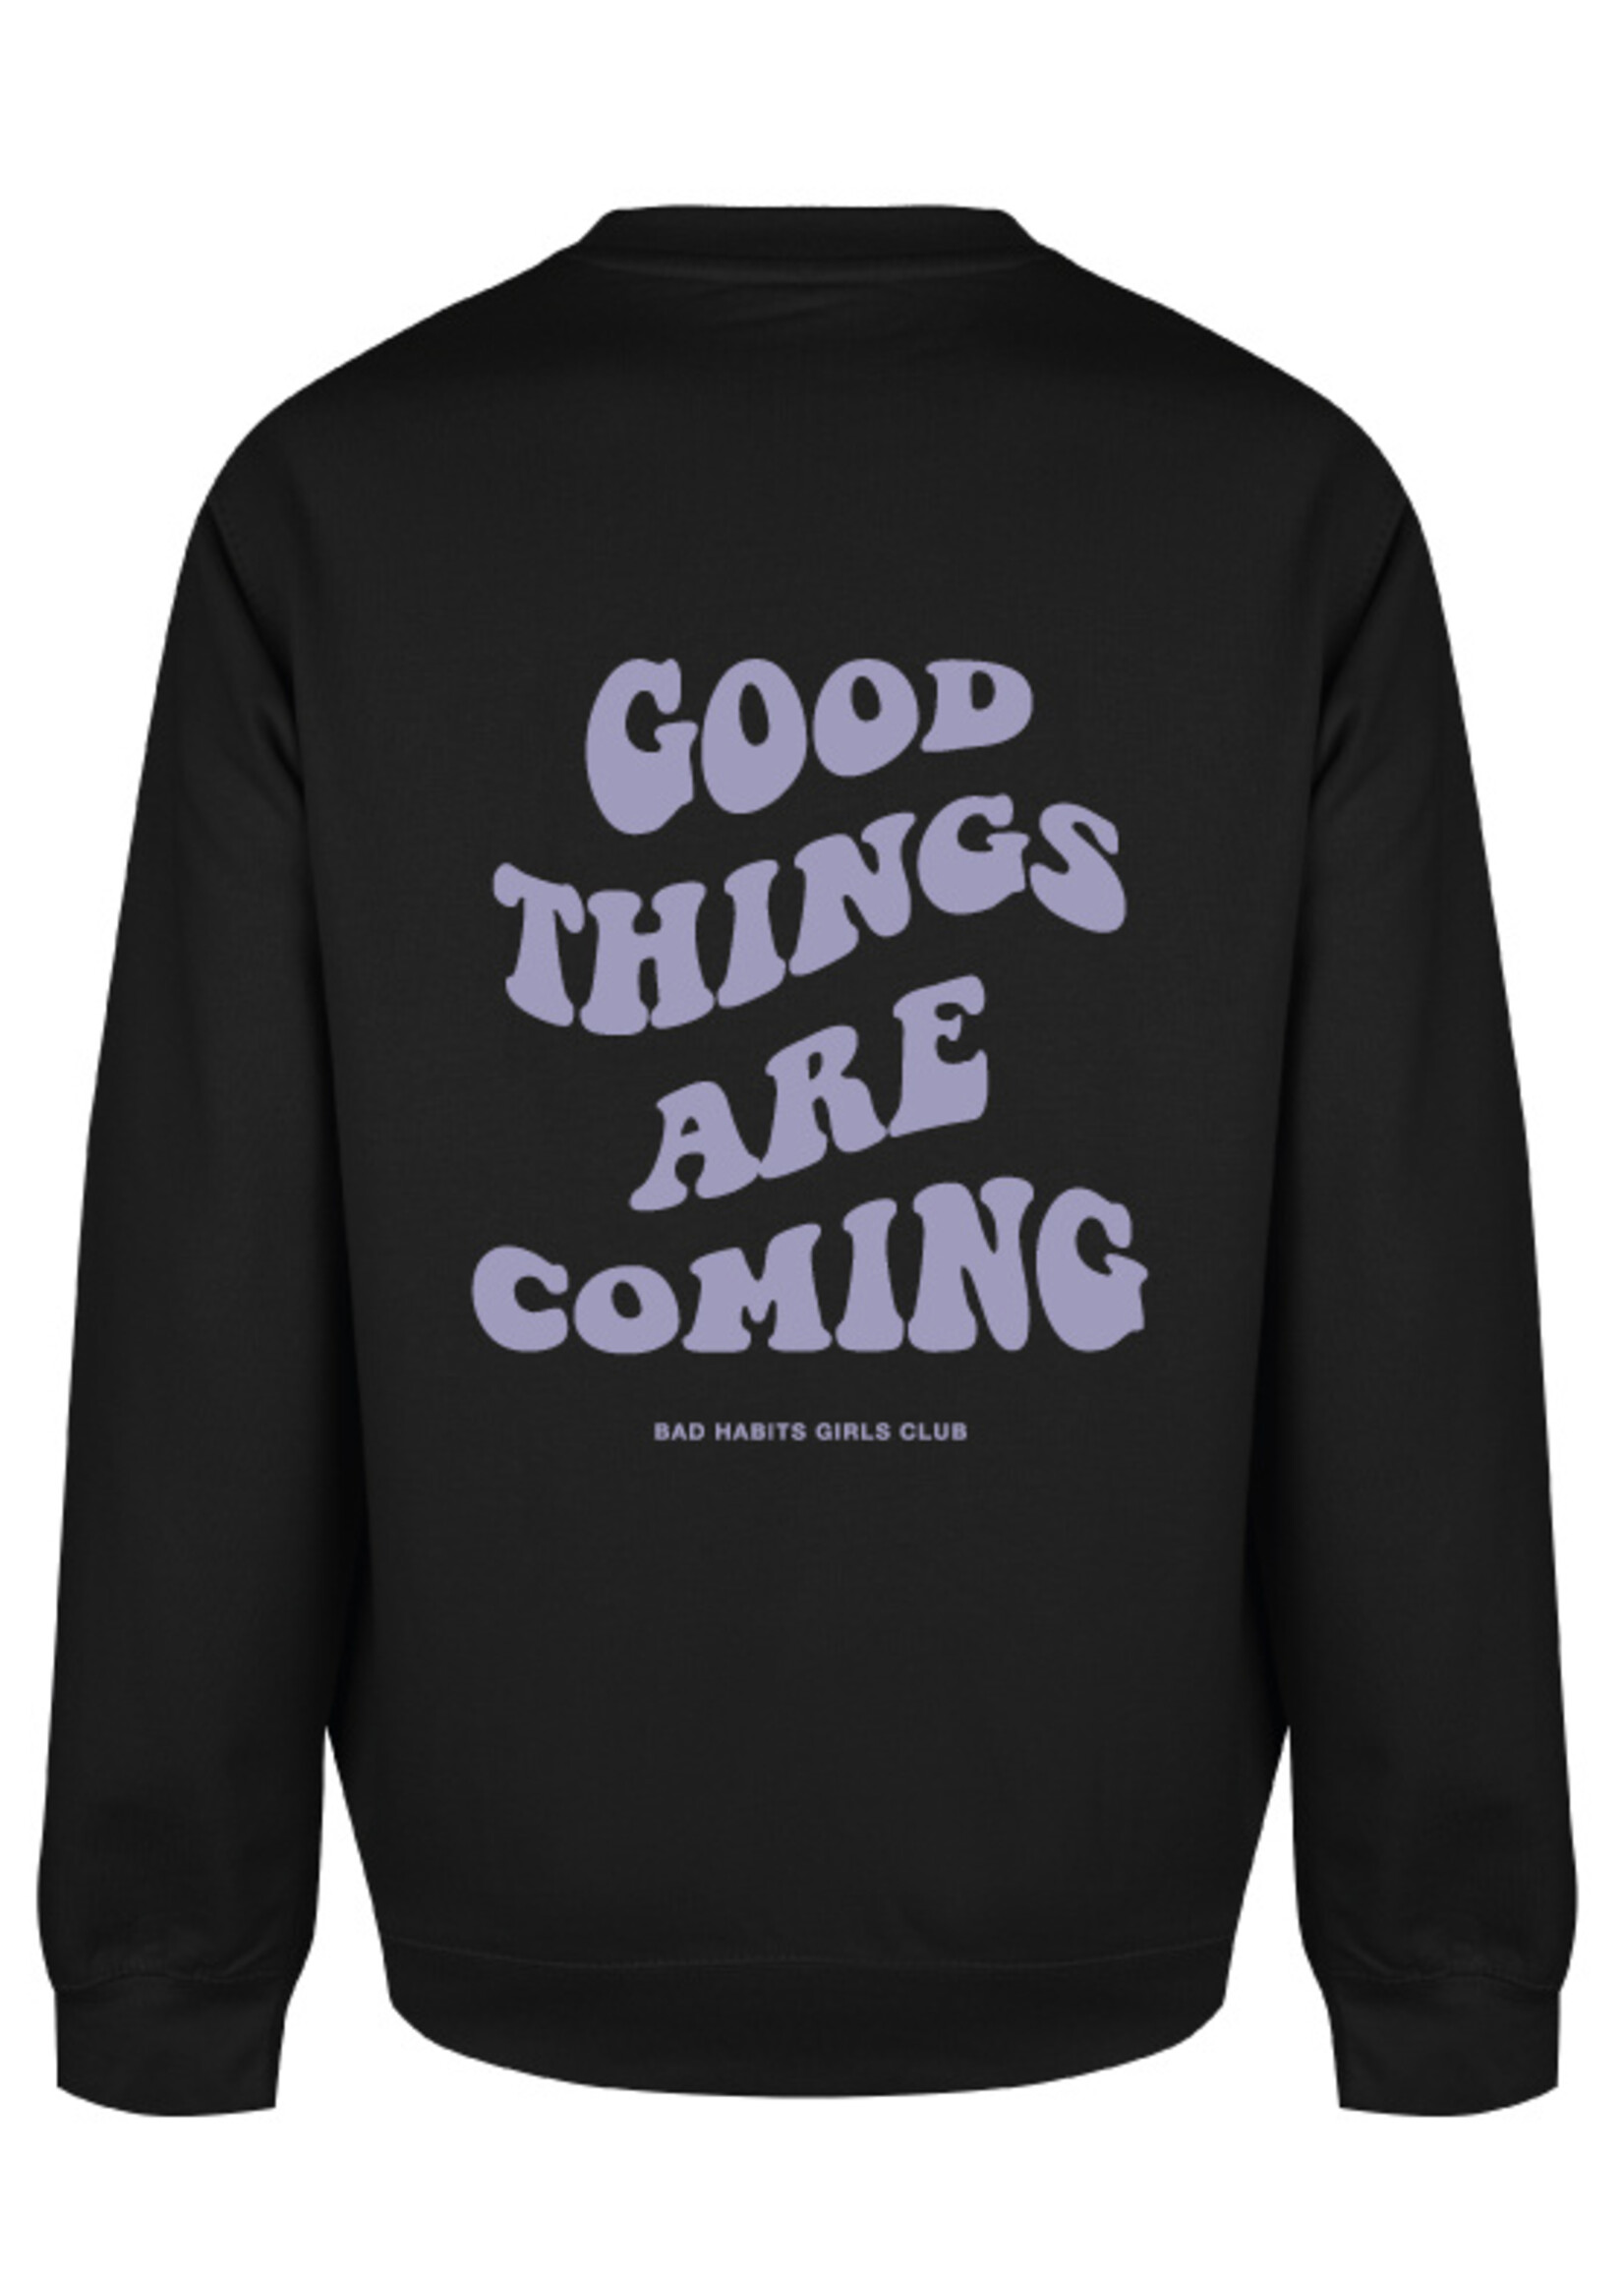 GOOD THINGS ARE COMING SWEATER